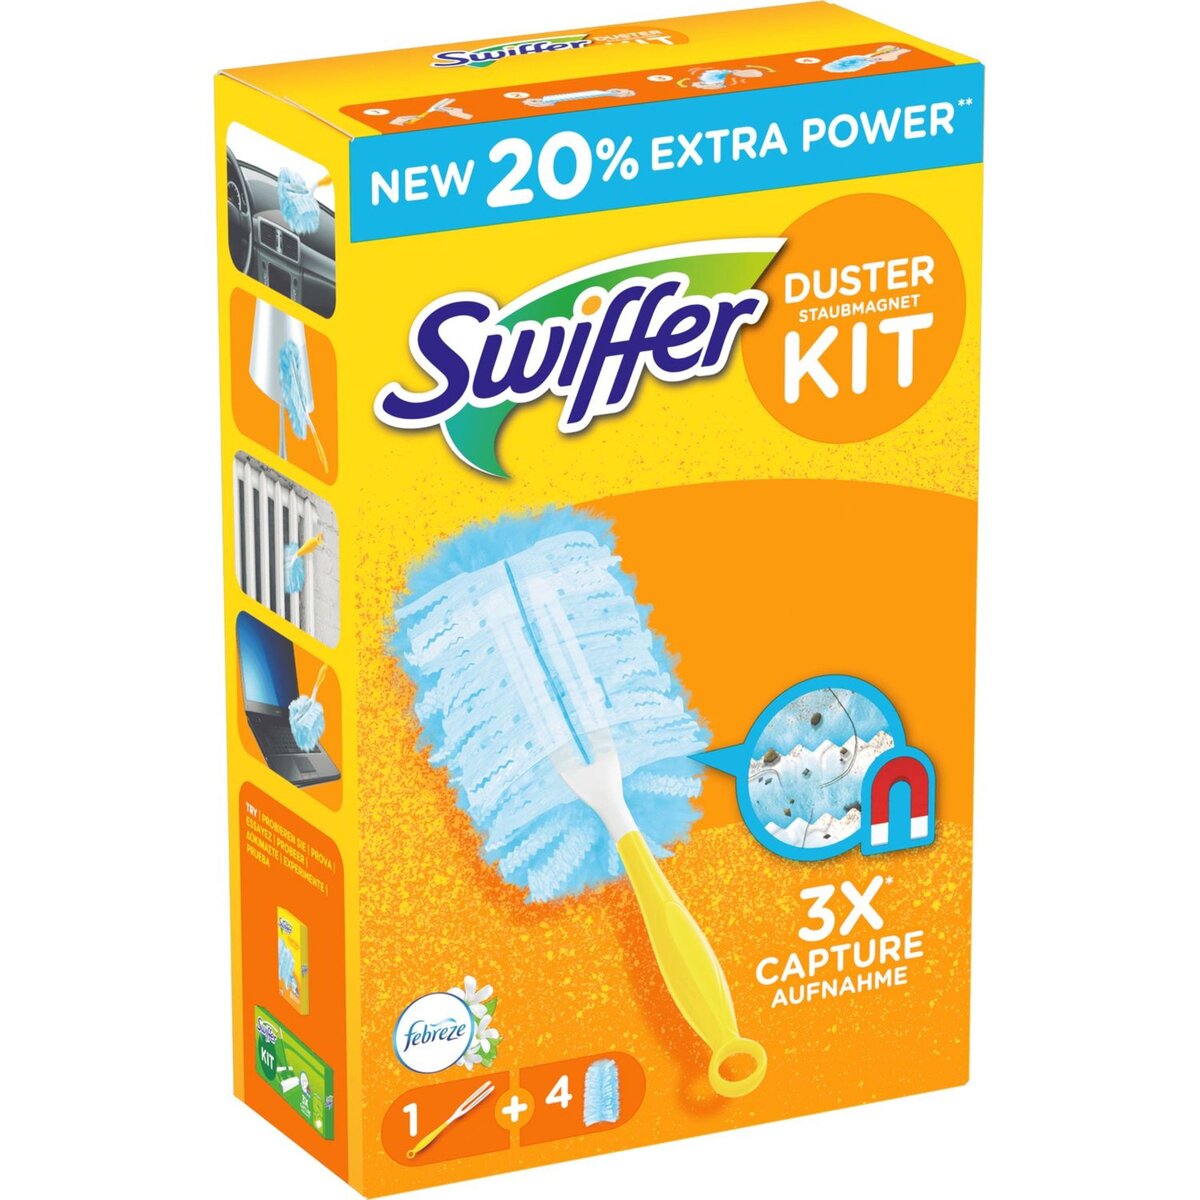 Plumeau Swiffer Duster Kit (1 Manche + 5 Recharges)